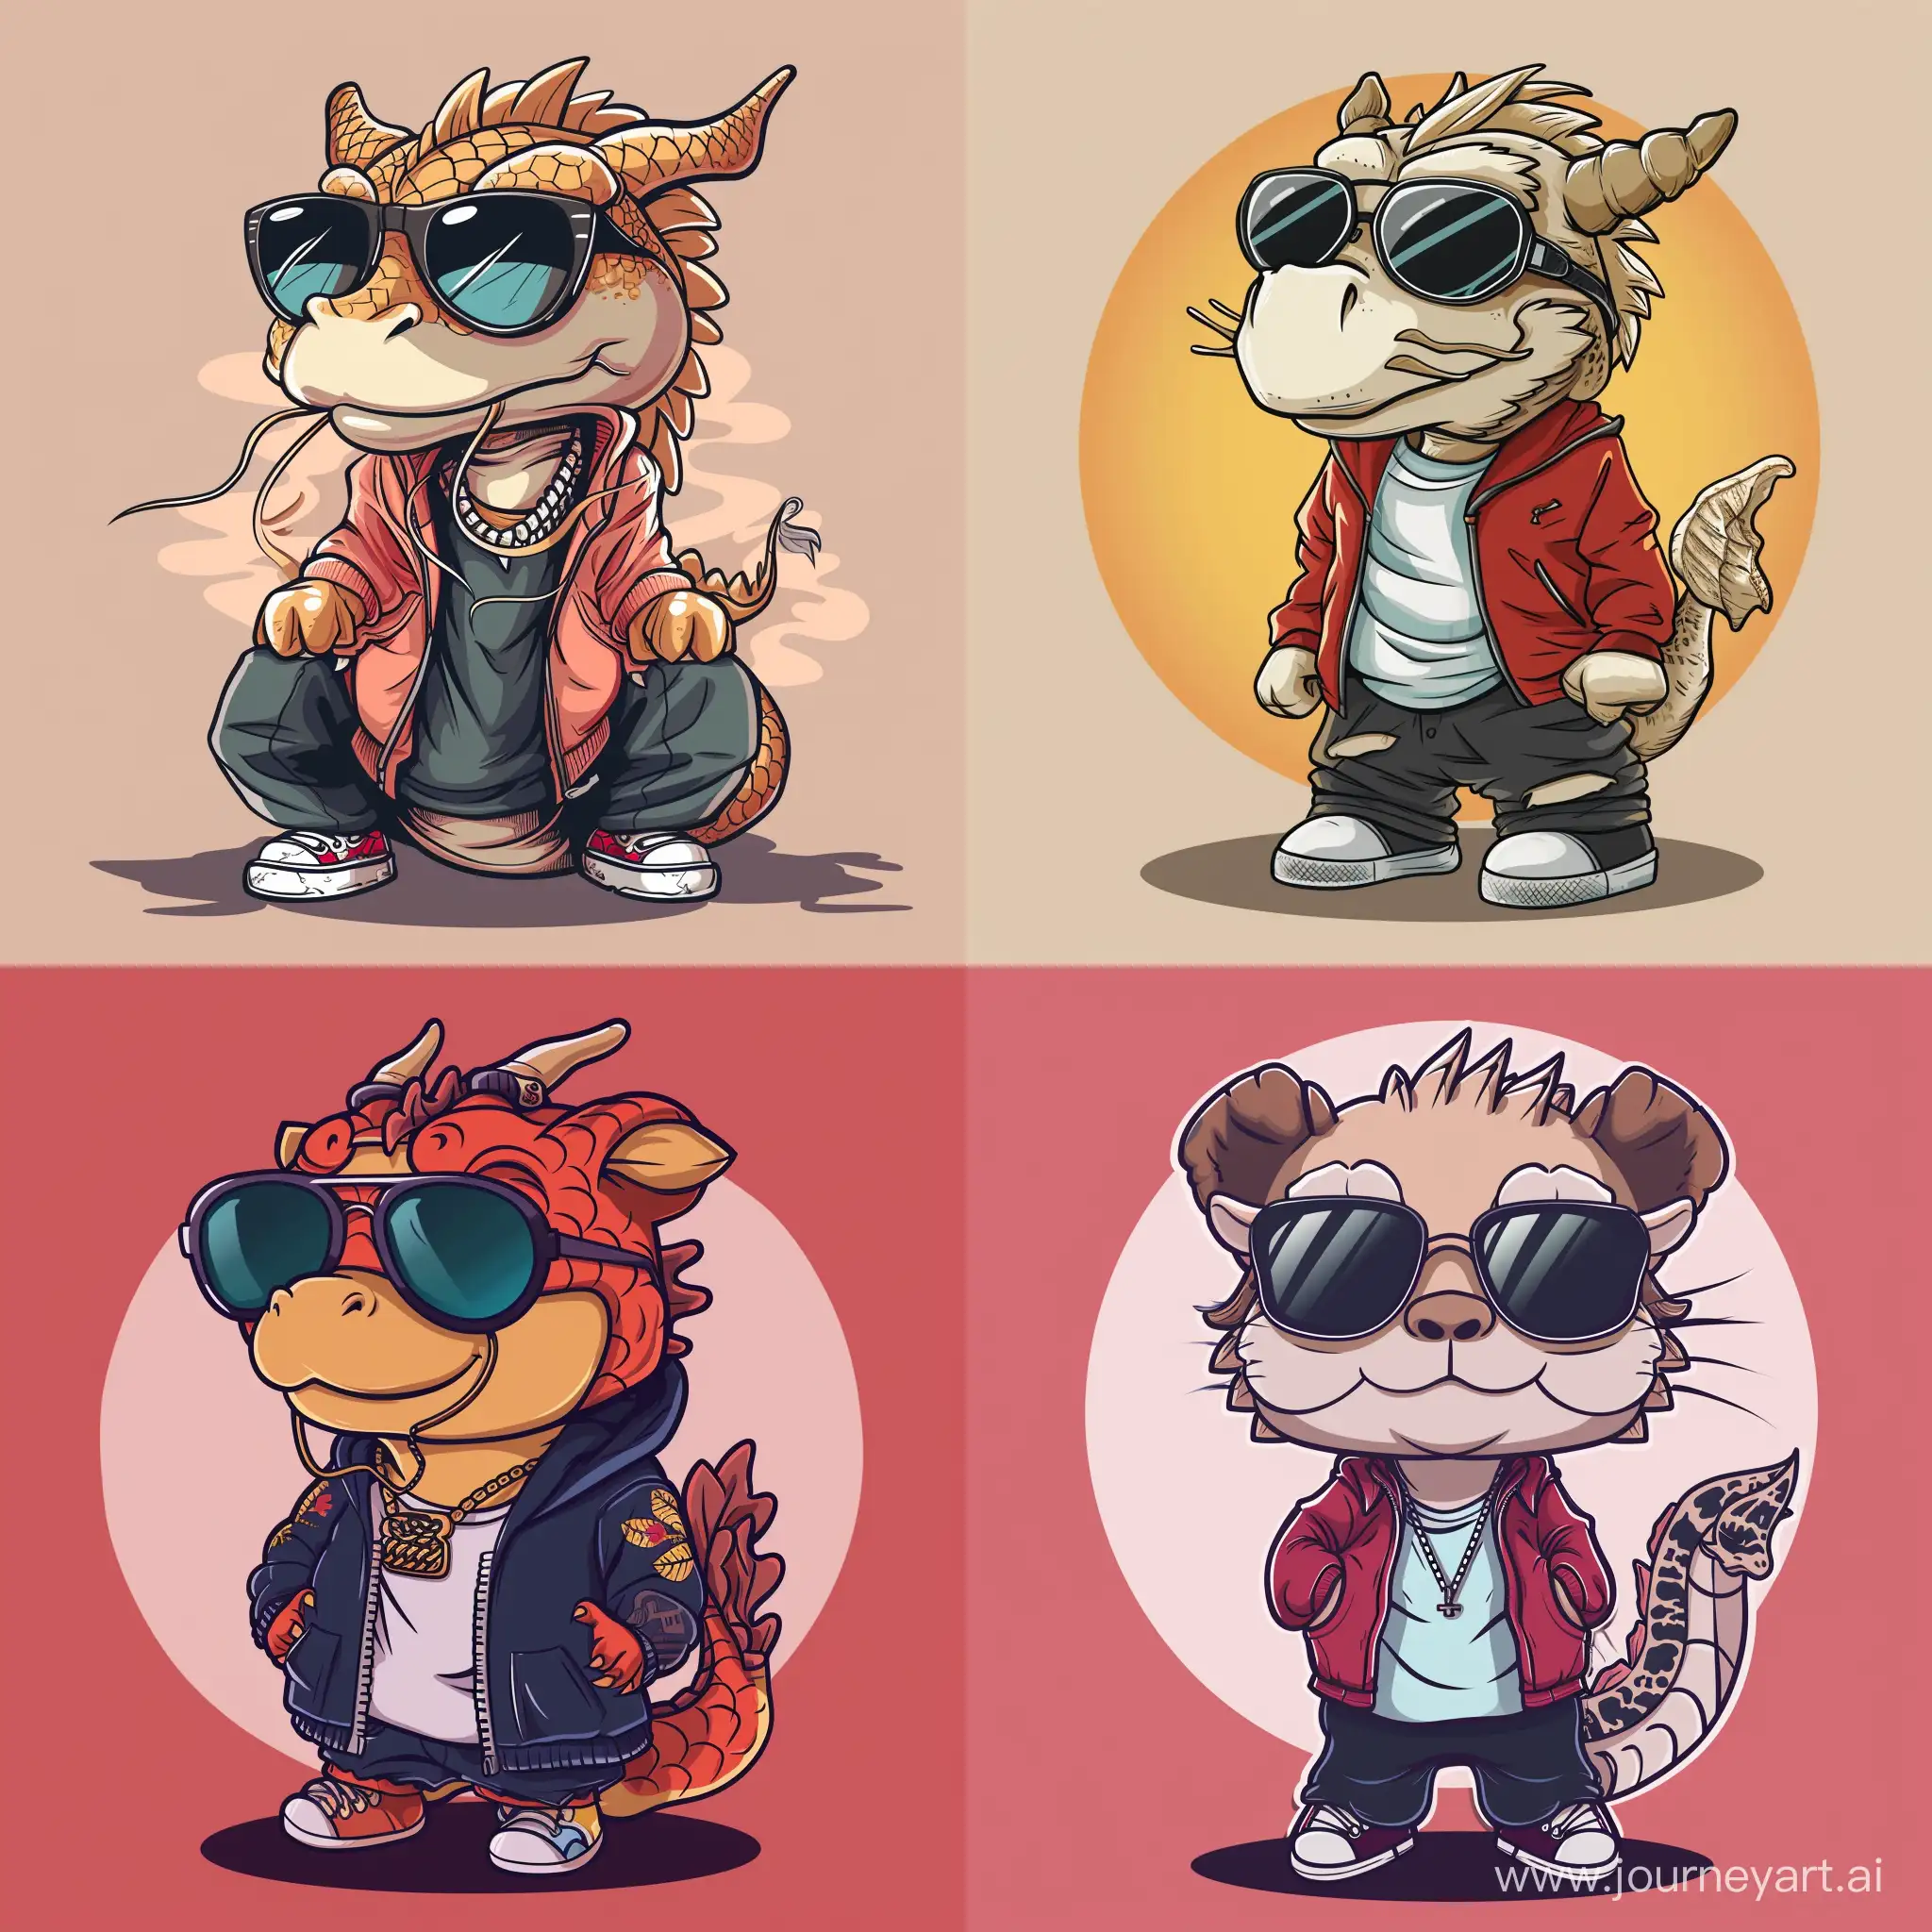 Cool-Chinese-Dragon-in-Hip-Hop-Attire-and-Sunglasses